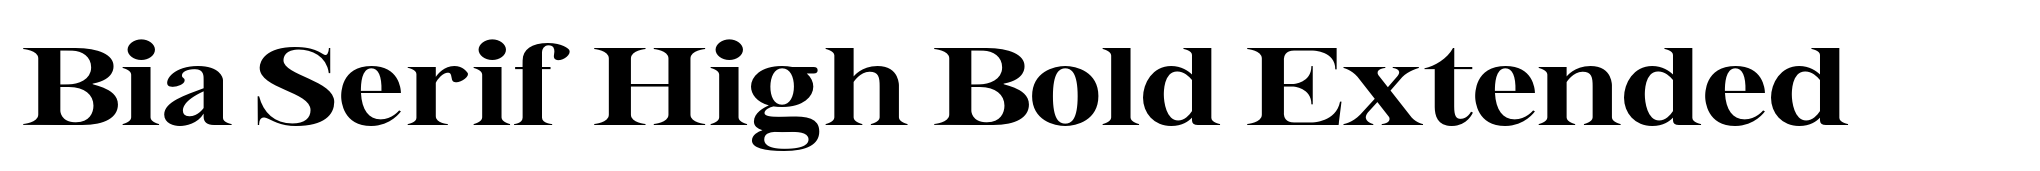 Bia Serif High Bold Extended image